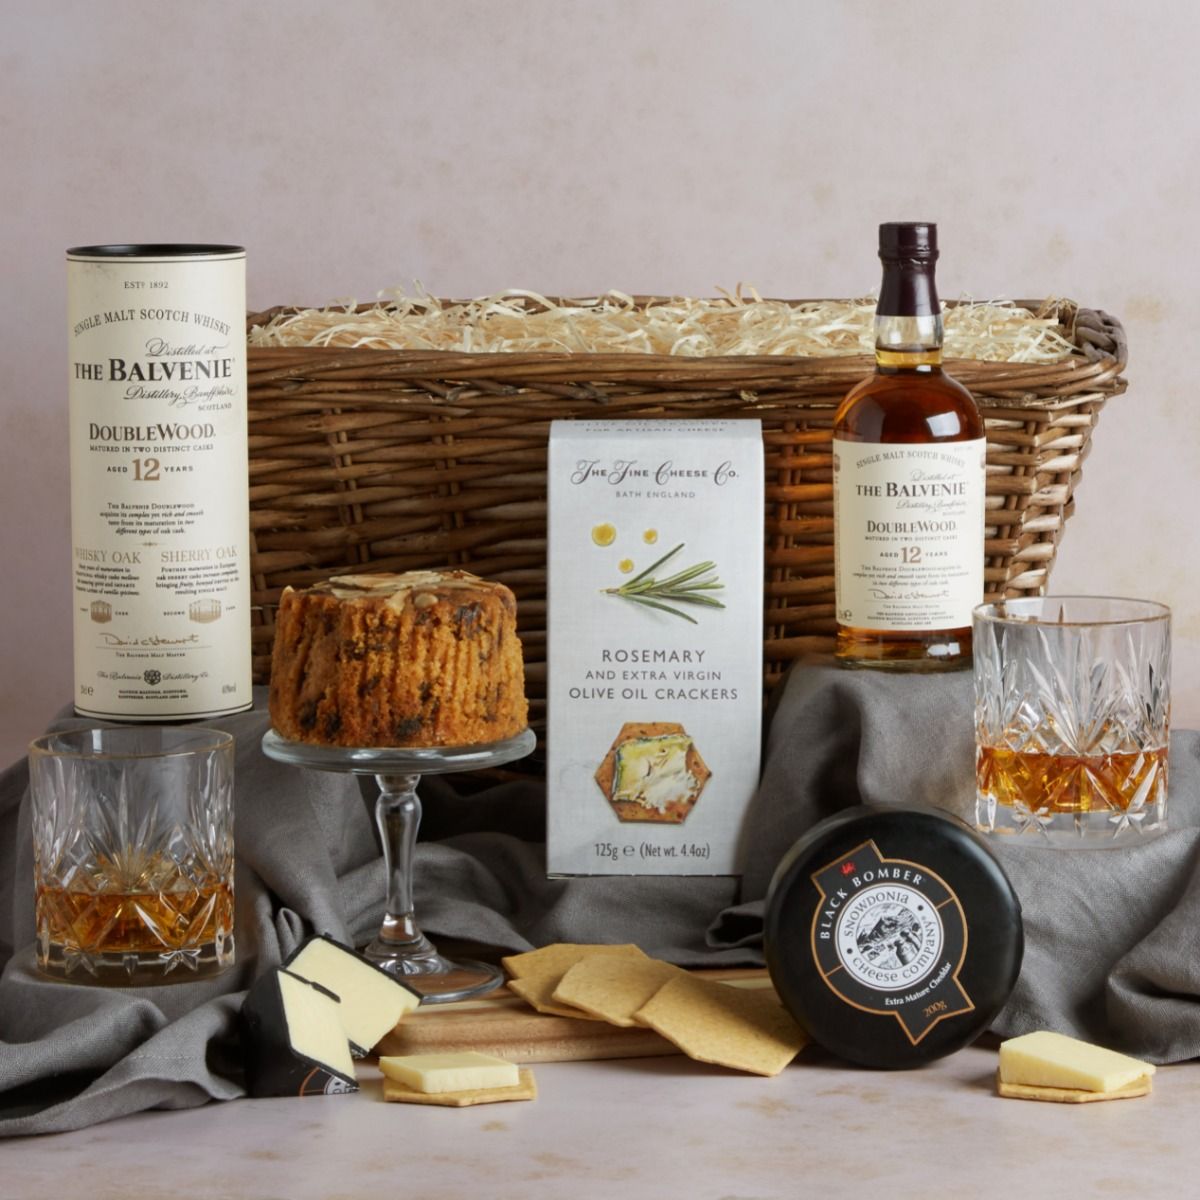 Valentine's premium whisky & food gift basket with contents on display and open gift basket